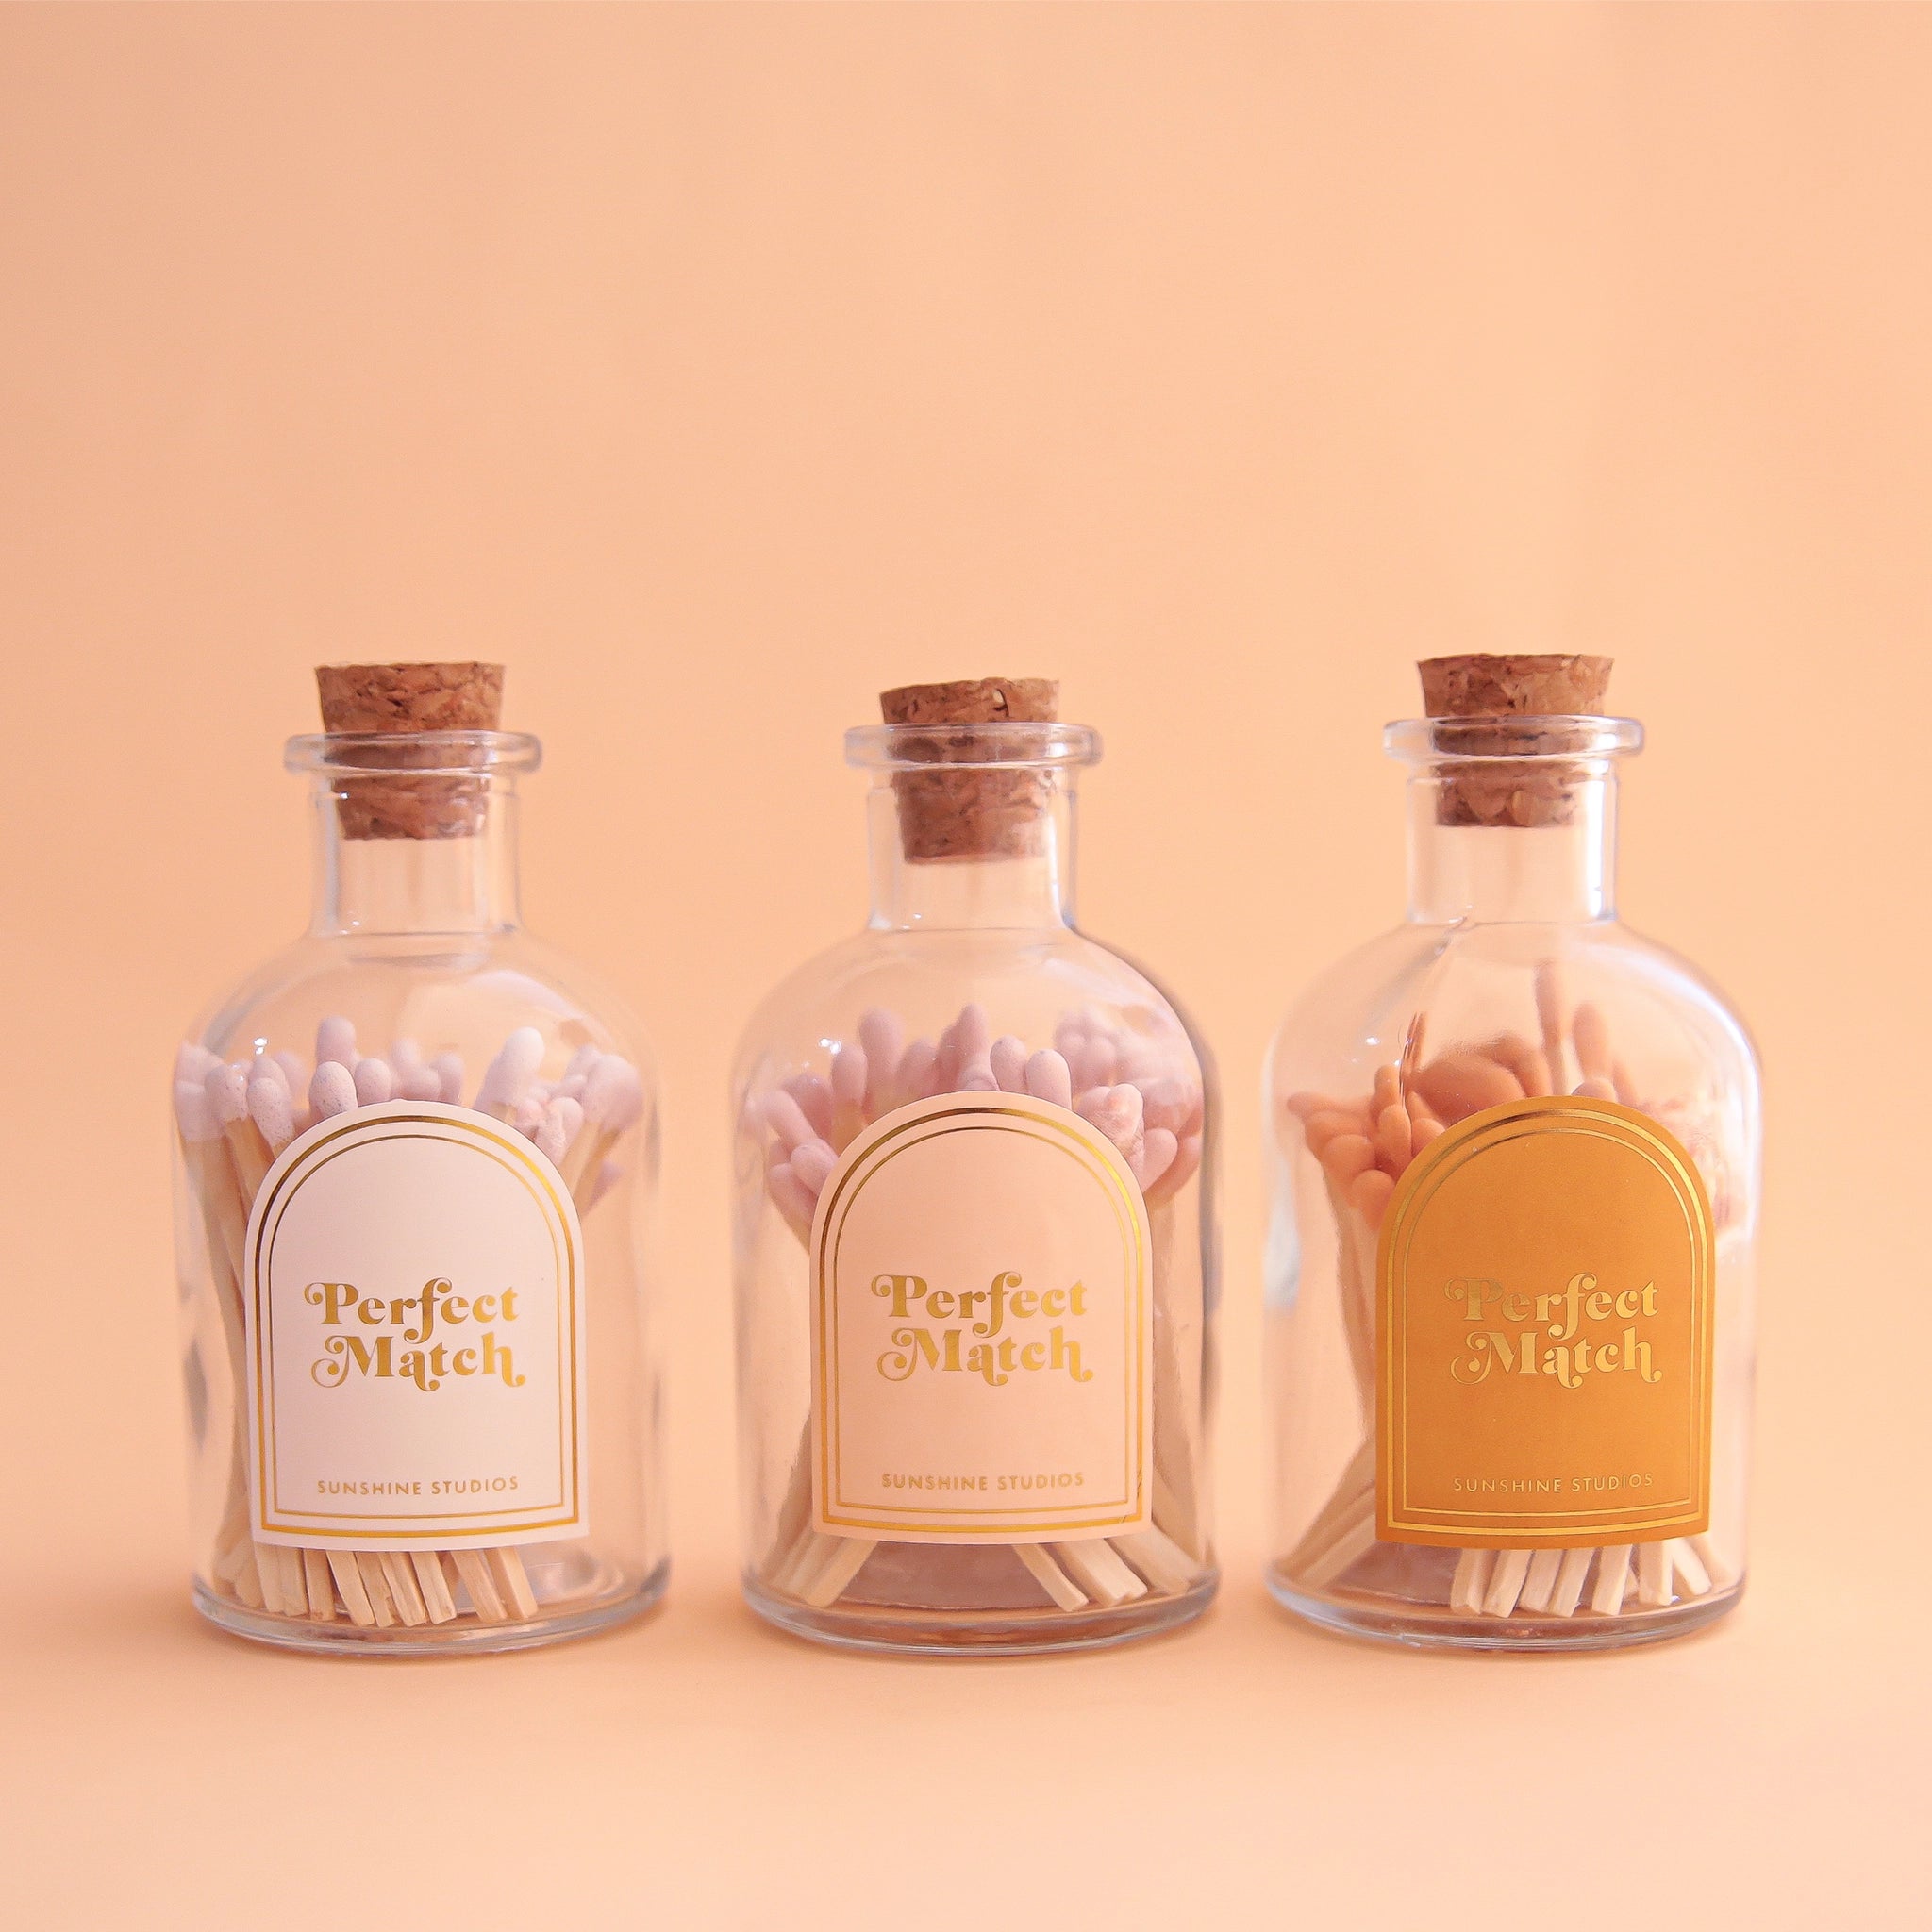 Three glass jars filled with wooden matches and a cork stopper. Each jar has an arched label that reads, "Perfect Match" in white, pink and gold. 